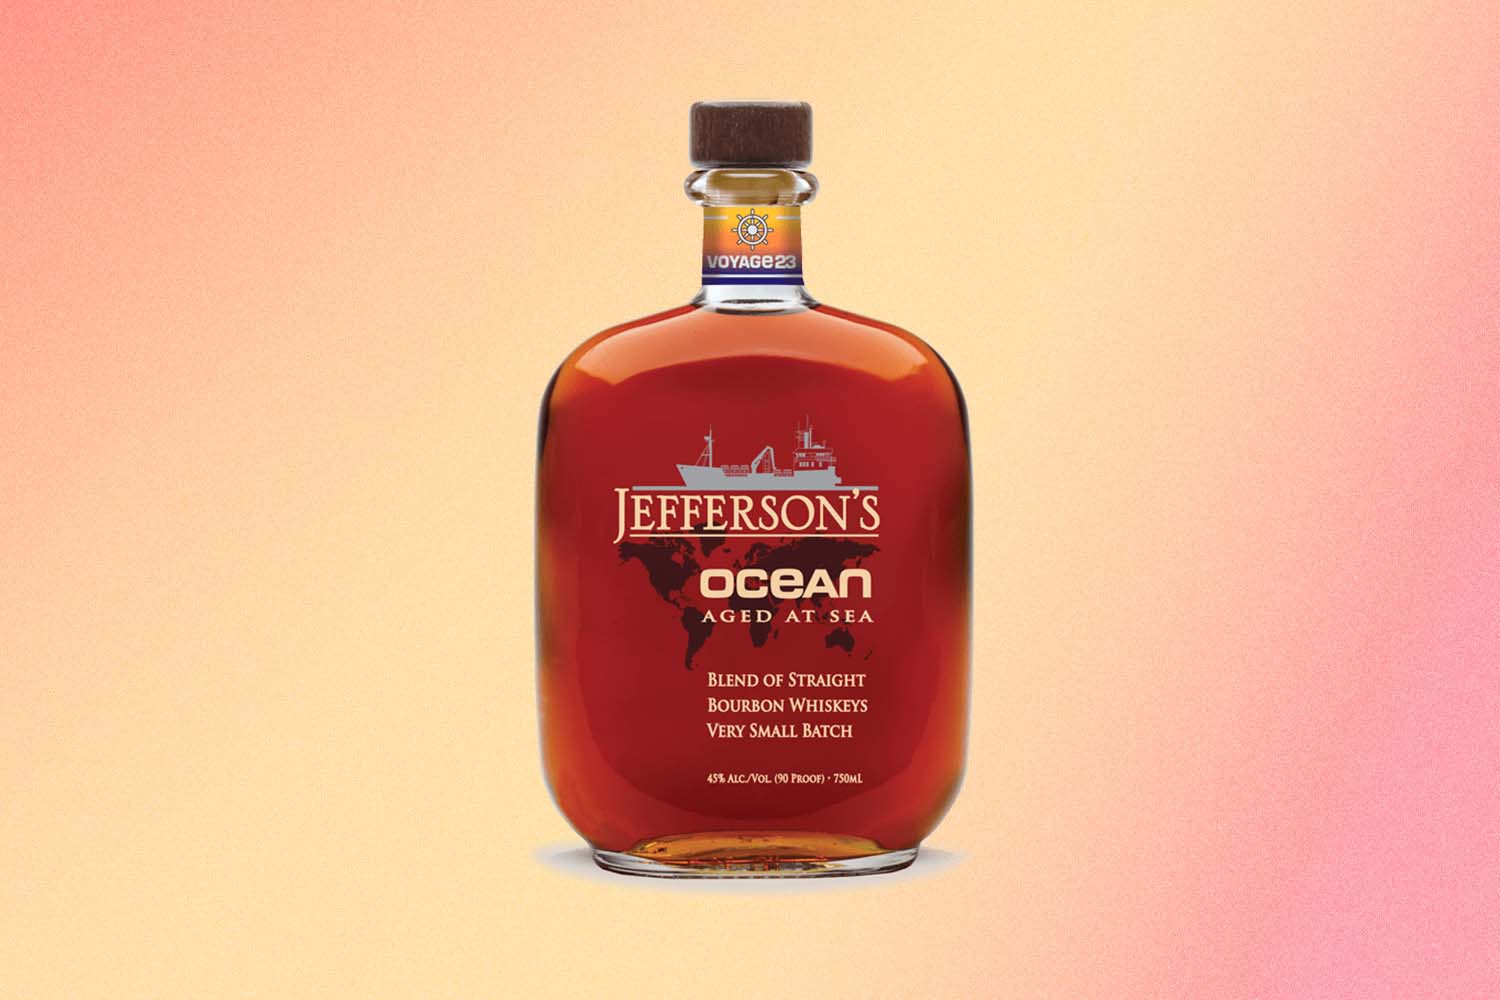 Jefferson's Ocean Aged at Sea